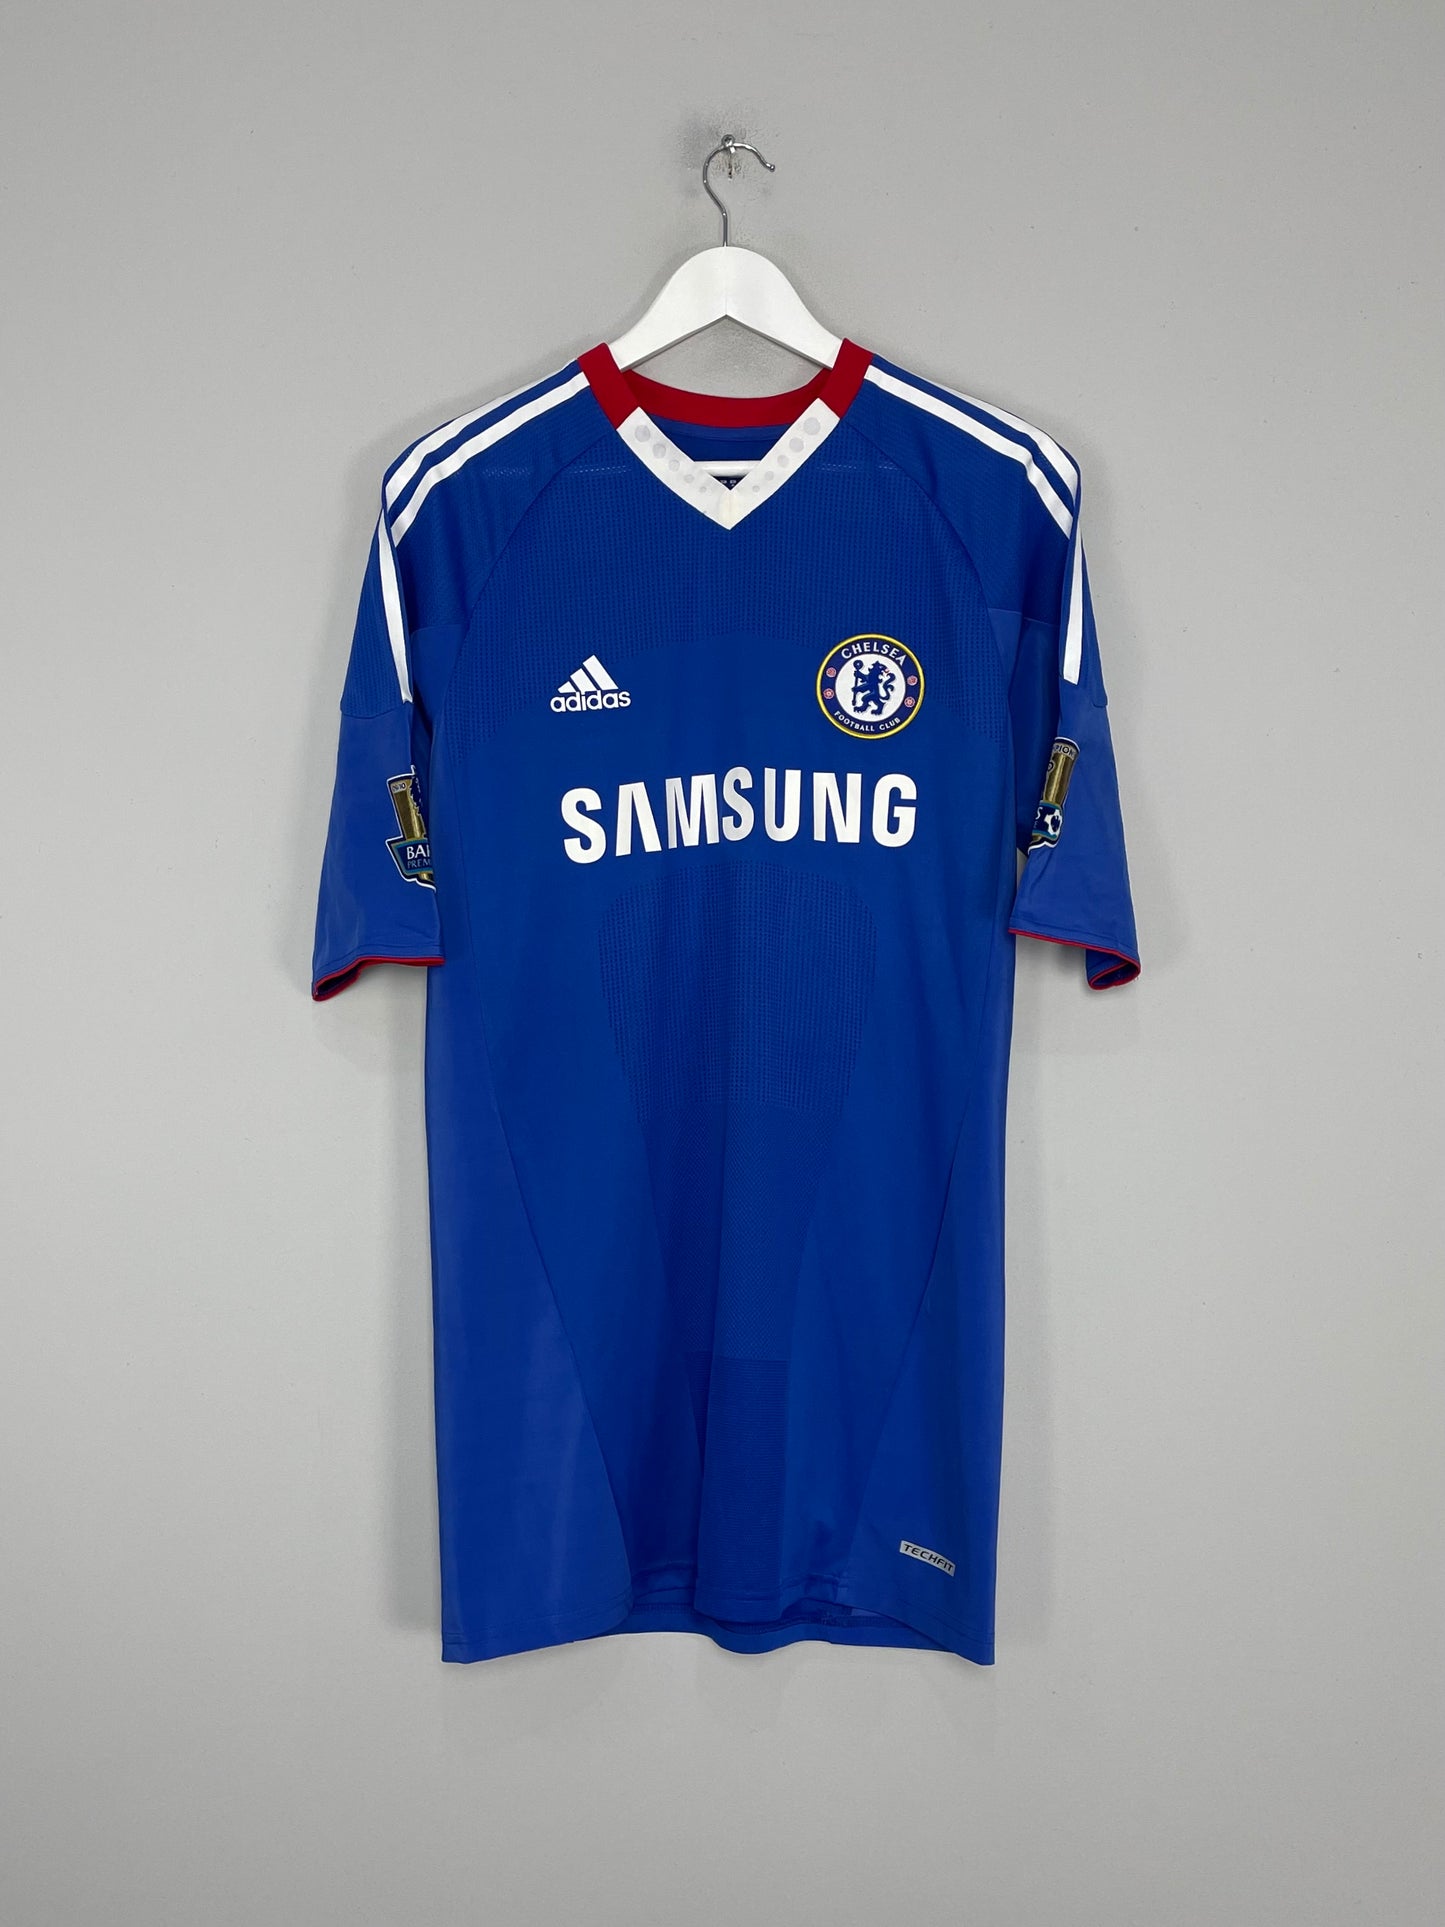 2010/11 CHELSEA TERRY #26 *MATCH ISSUE* L/S HOME SHIRT (XL) ADIDAS